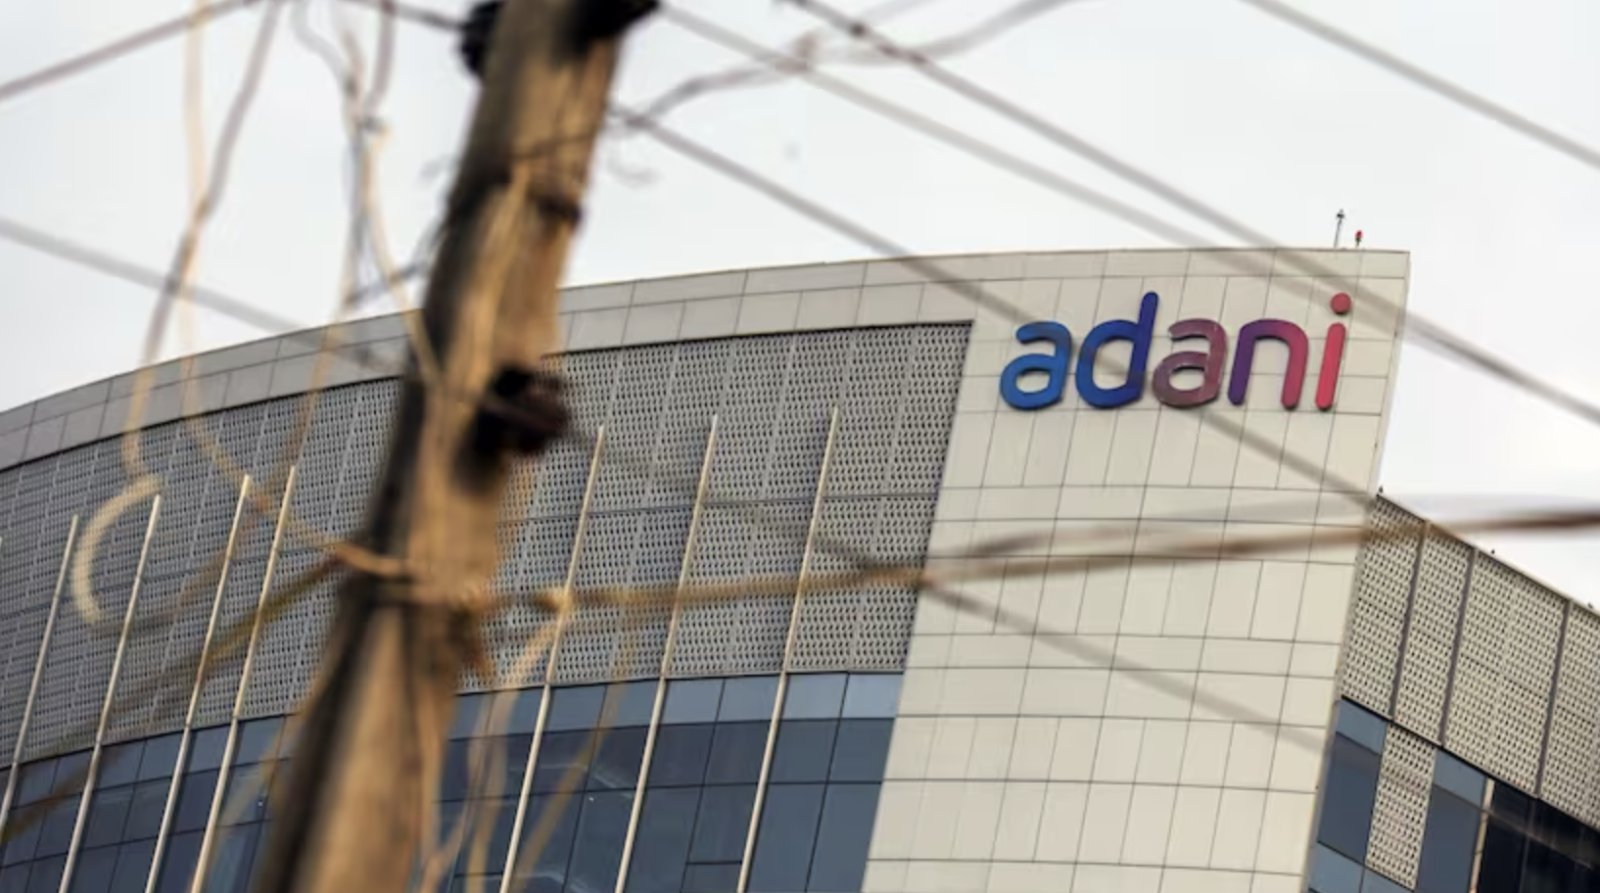 Tremendous rise in Adani Group's shares, Adani Energy's stock jumped 8 percent